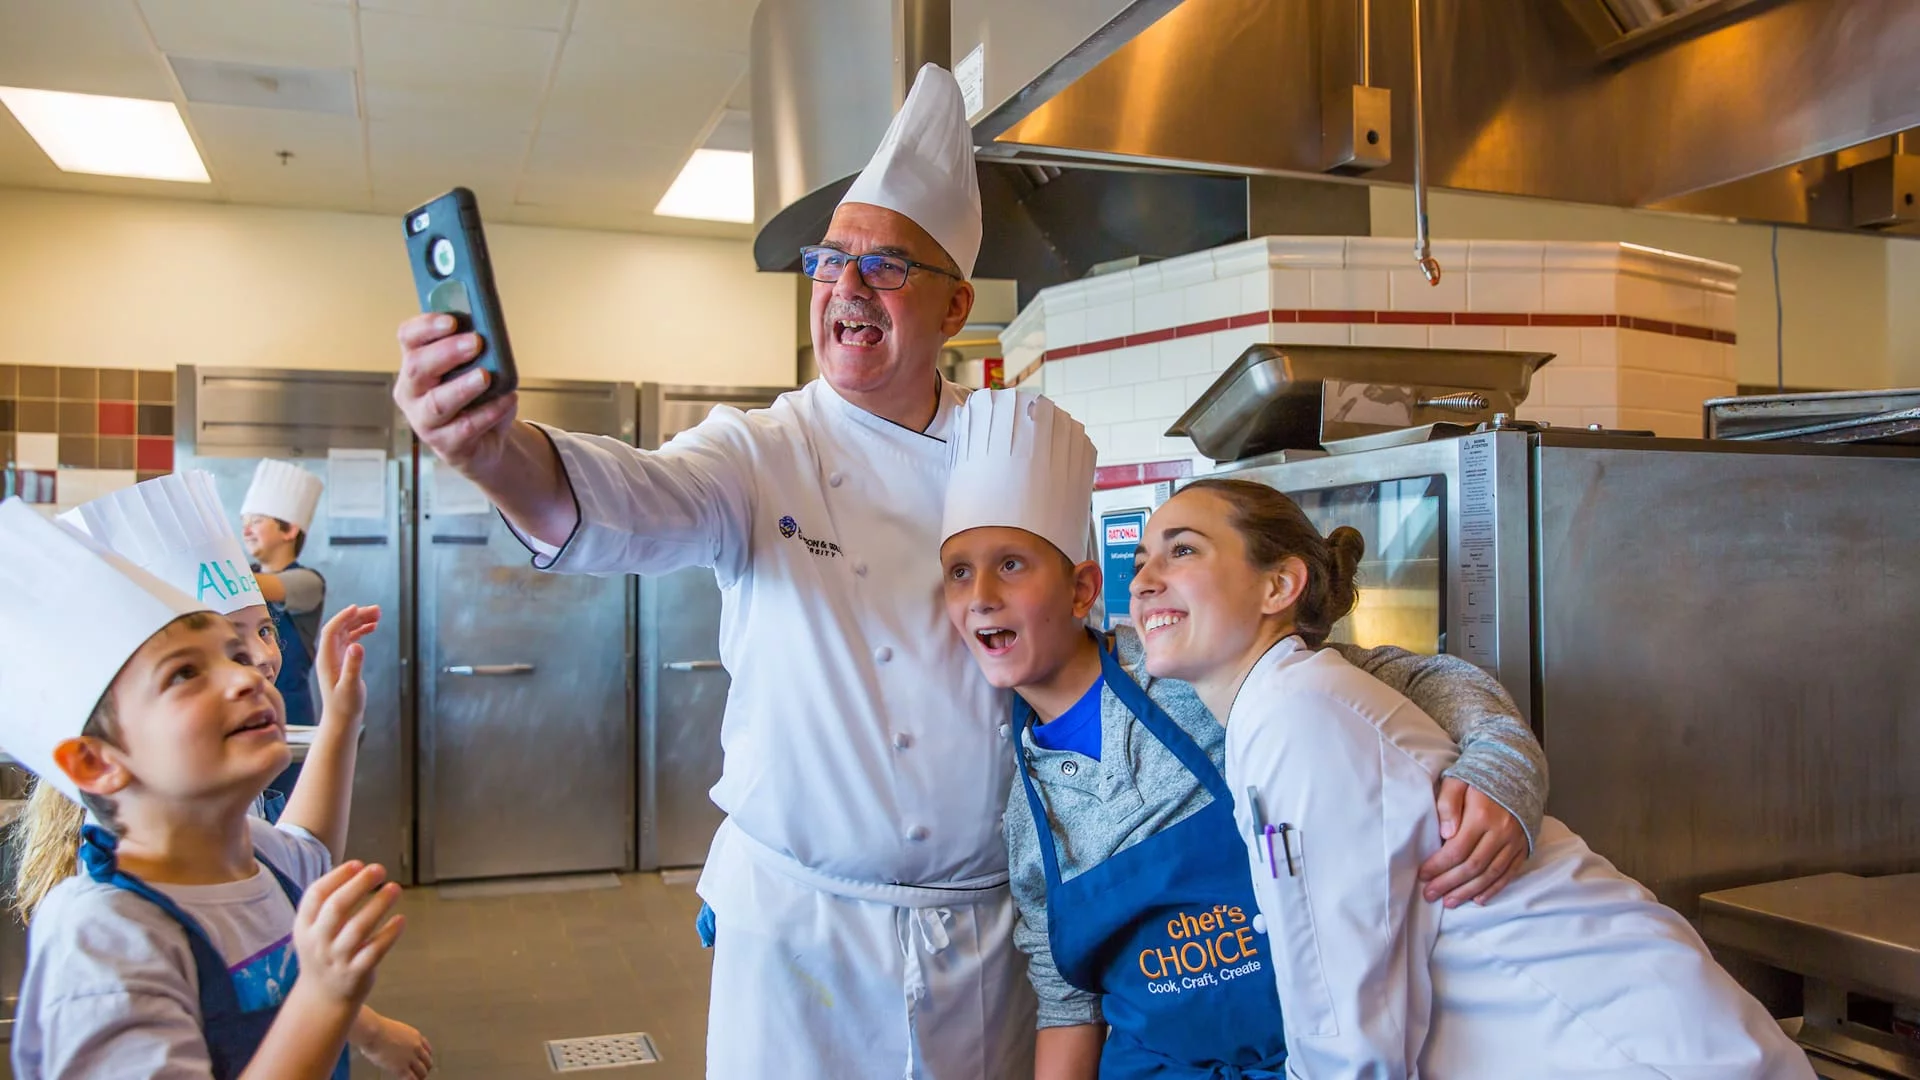 Chef Dion takes a selfie